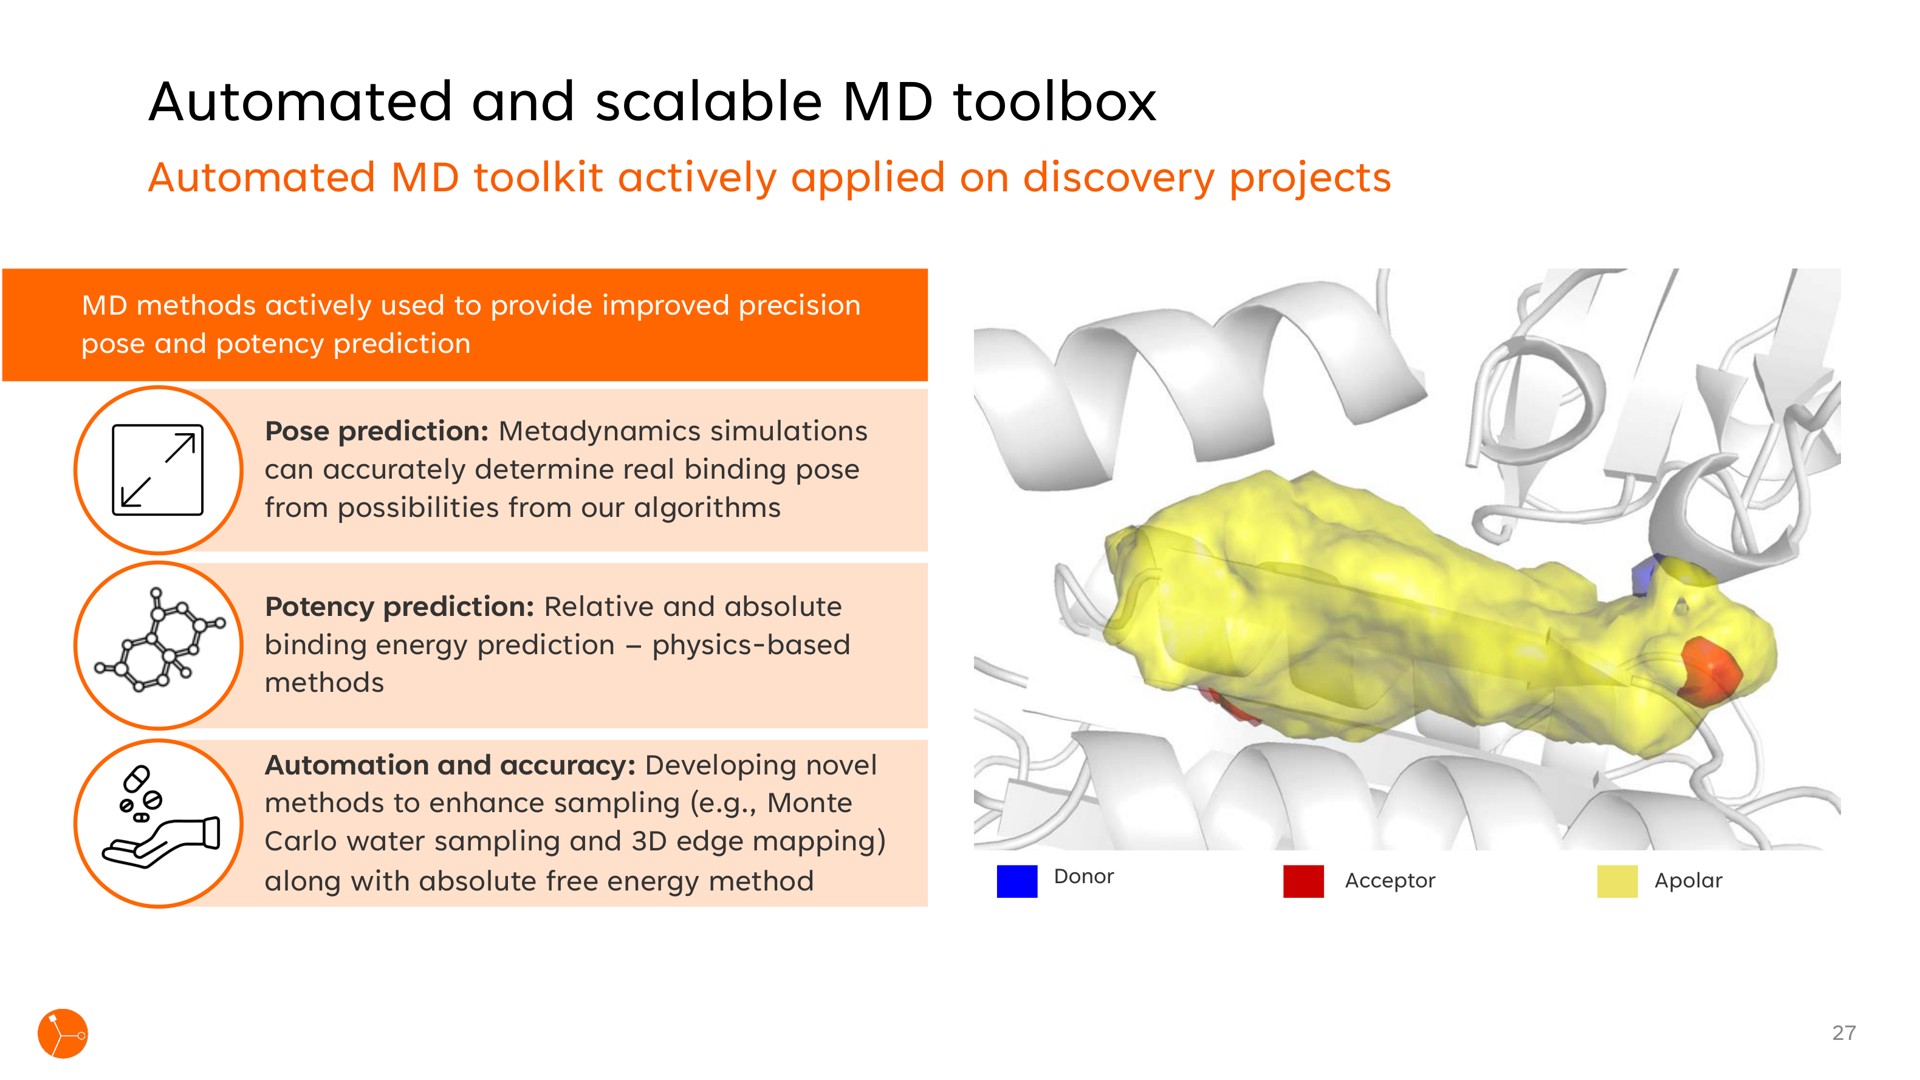 and scalable toolbox | Exscientia